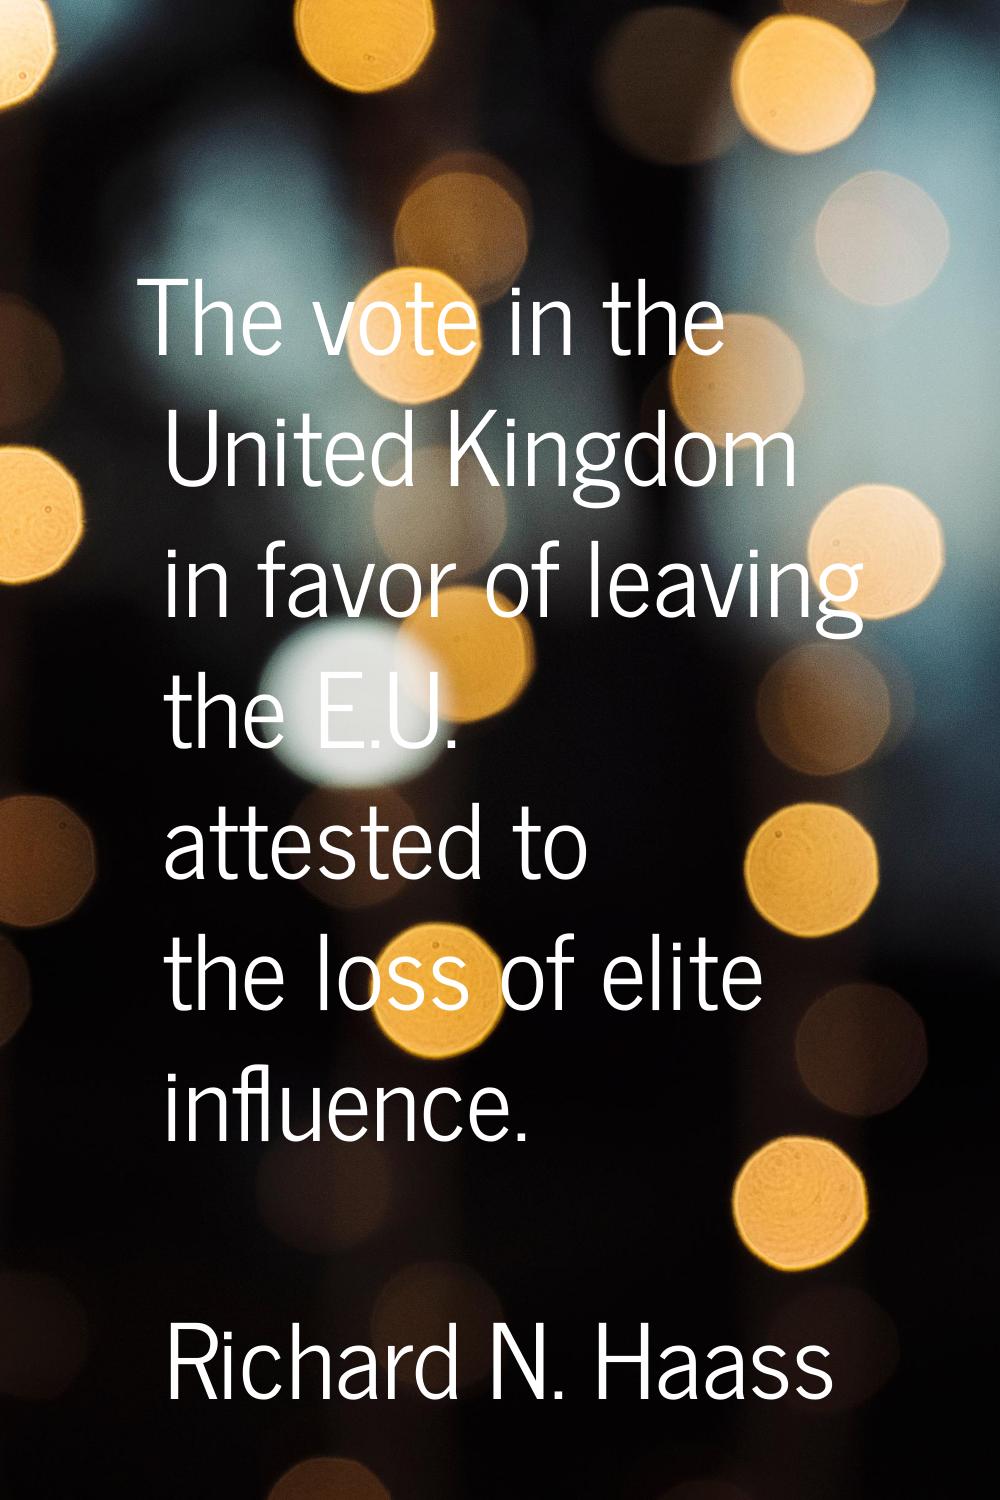 The vote in the United Kingdom in favor of leaving the E.U. attested to the loss of elite influence